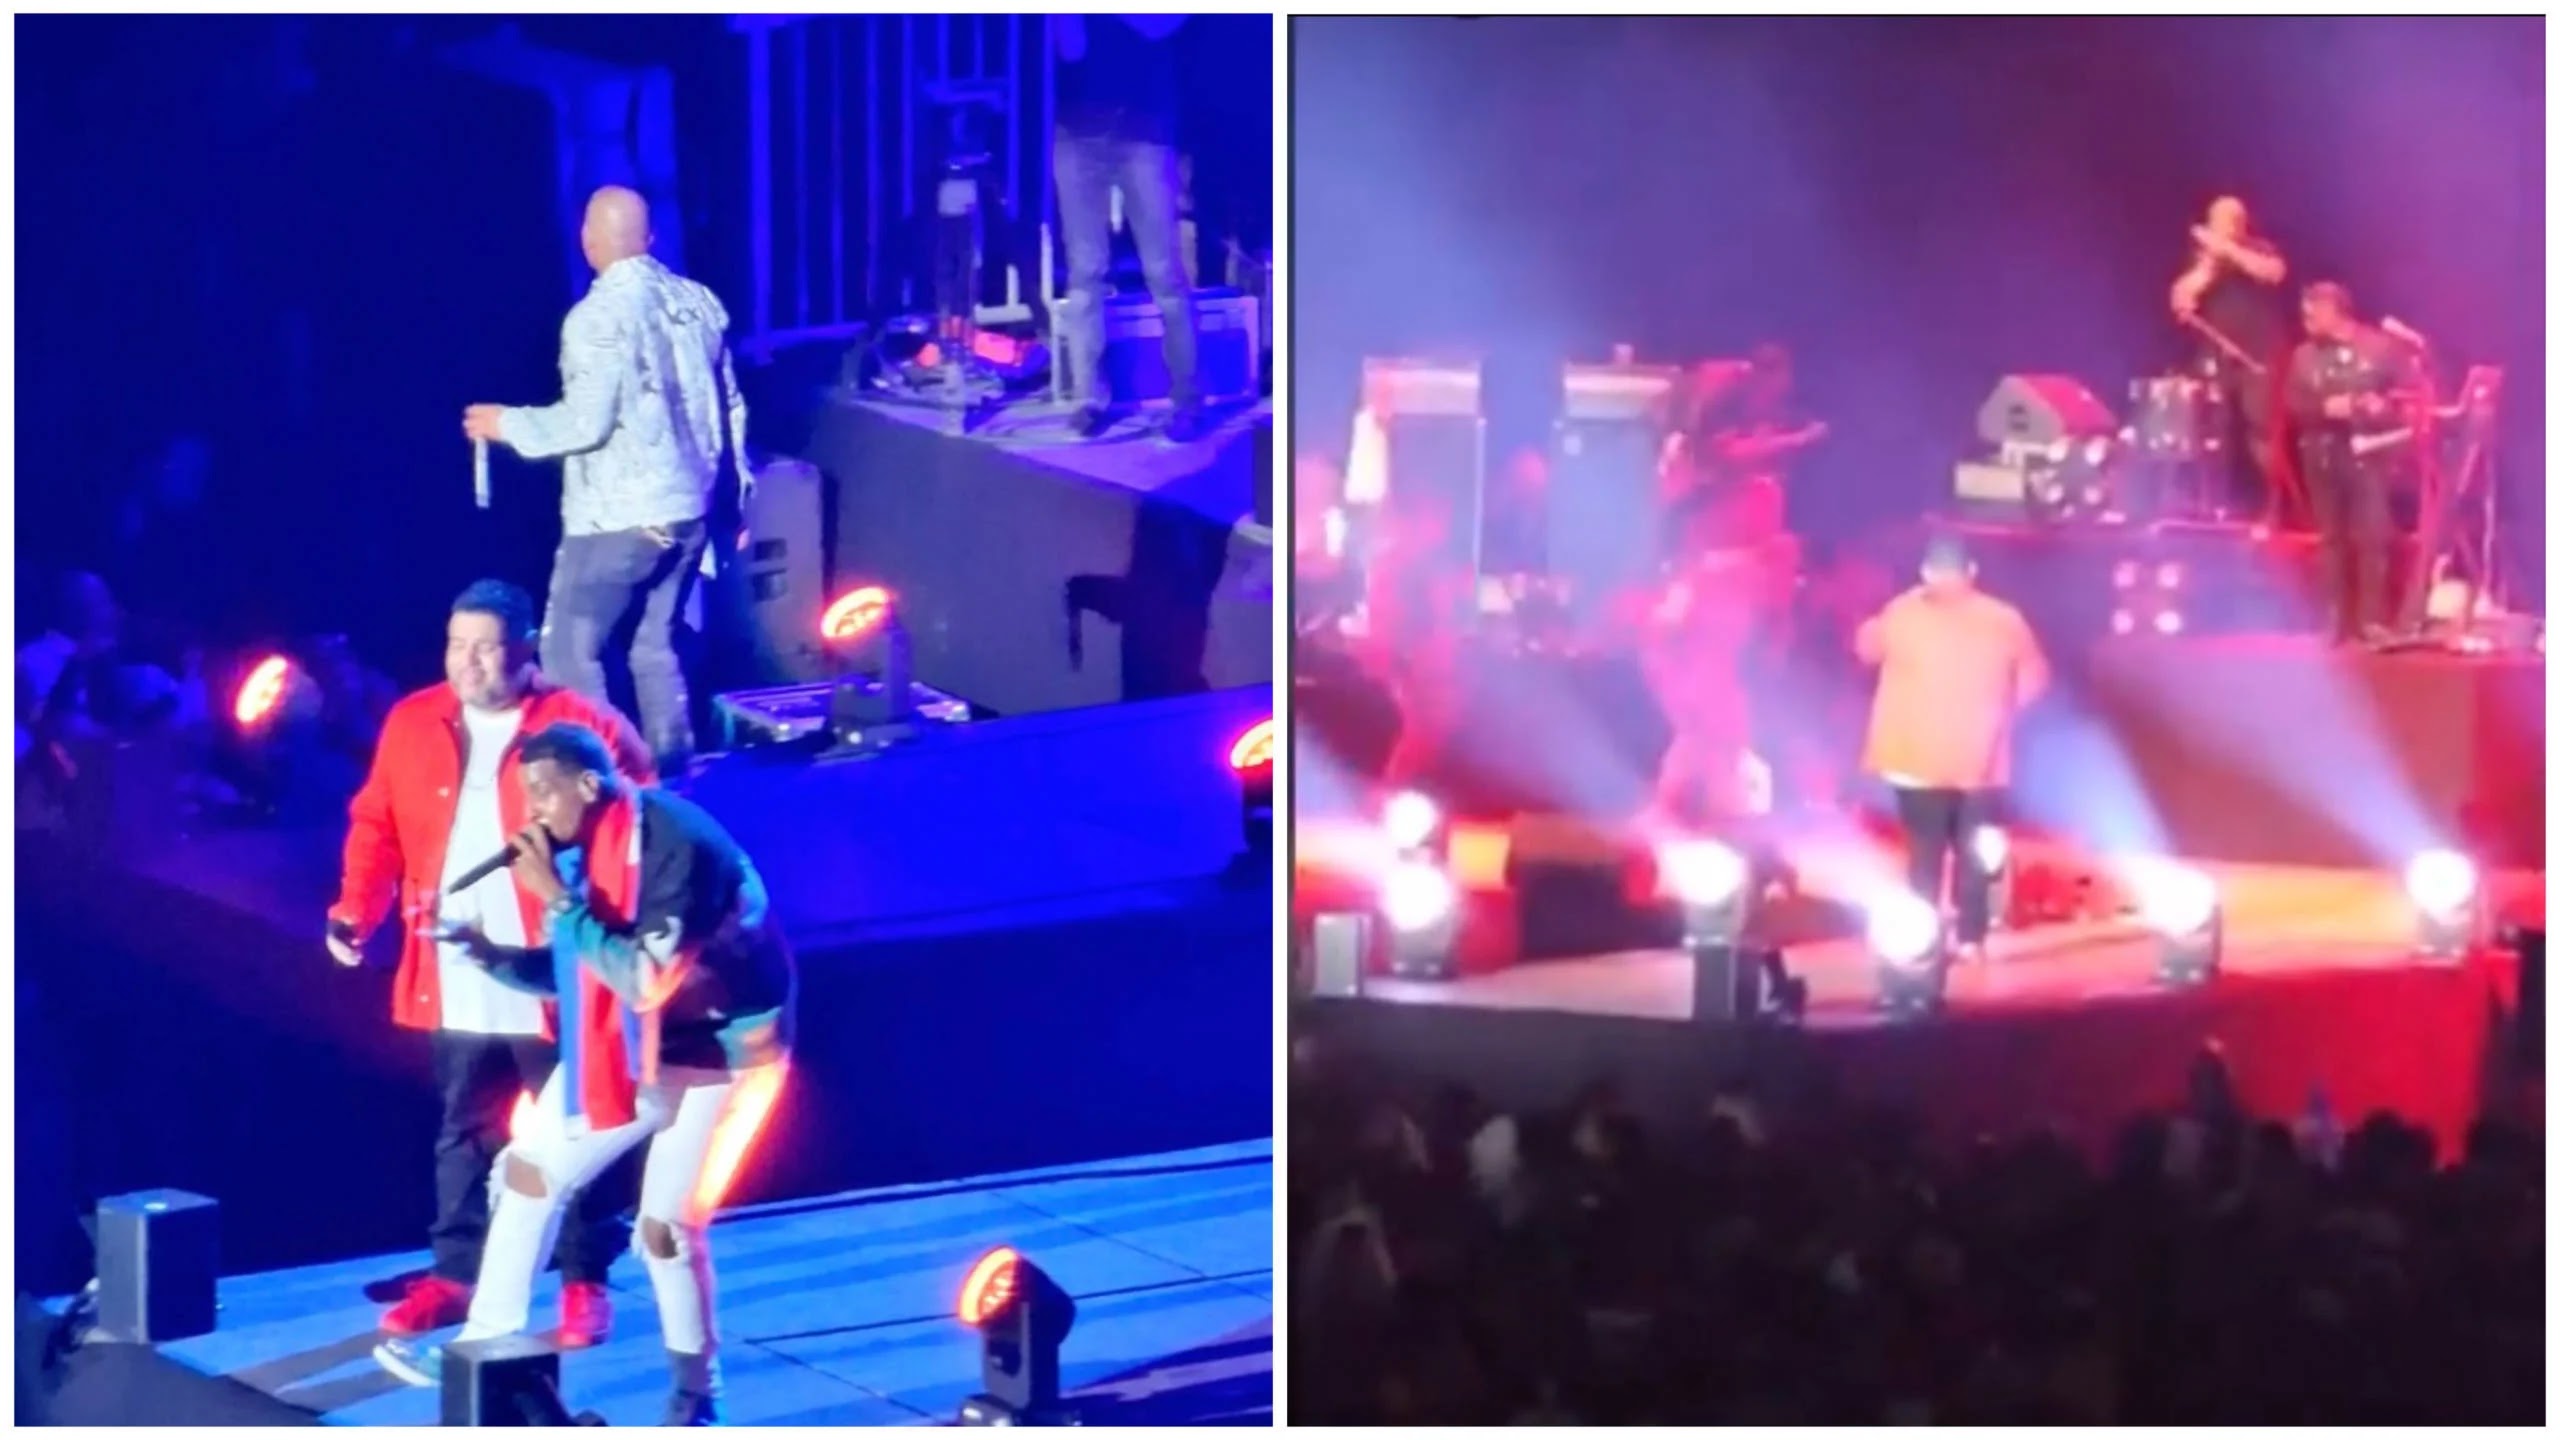 Haitian Singer Collapses on Stage and Dies Suddenly of Suspected Cardiac Arrest During Concert in Paris (VIDEO)